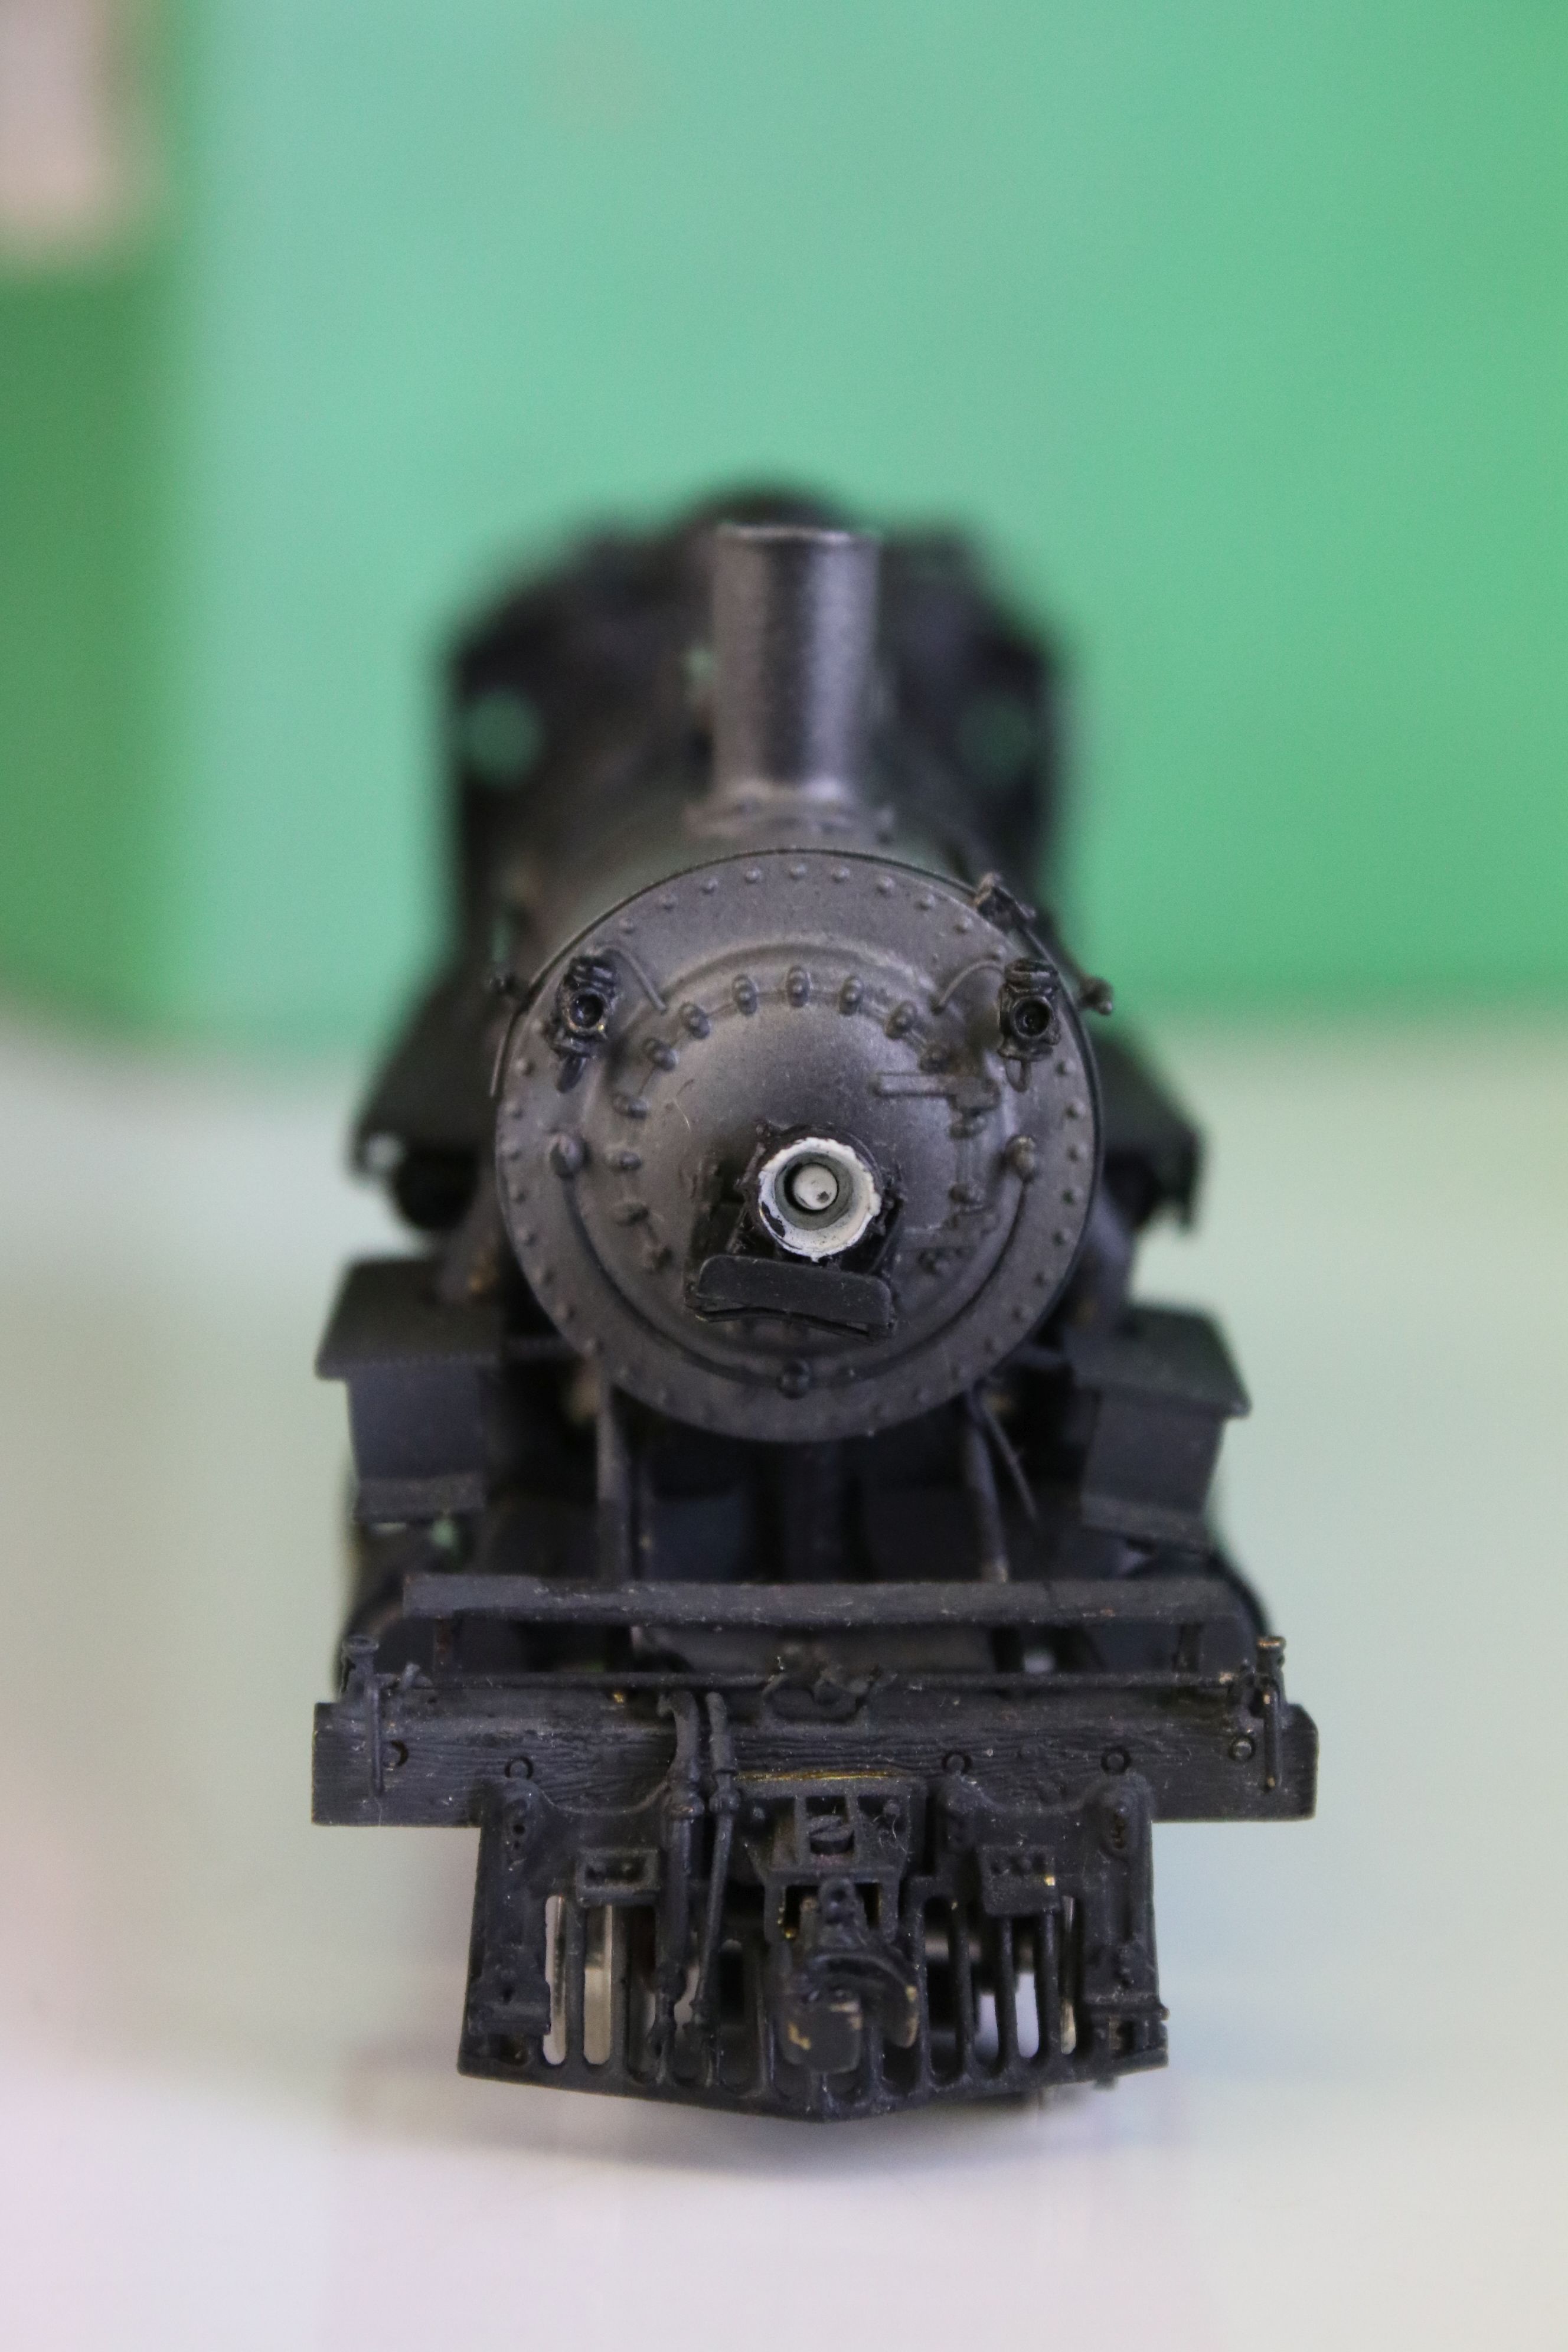 Boxed Overland Models Inc HO gauge C&NW 'D' 4-4-2 locomotive & tender with straight cylinders, - Image 3 of 13